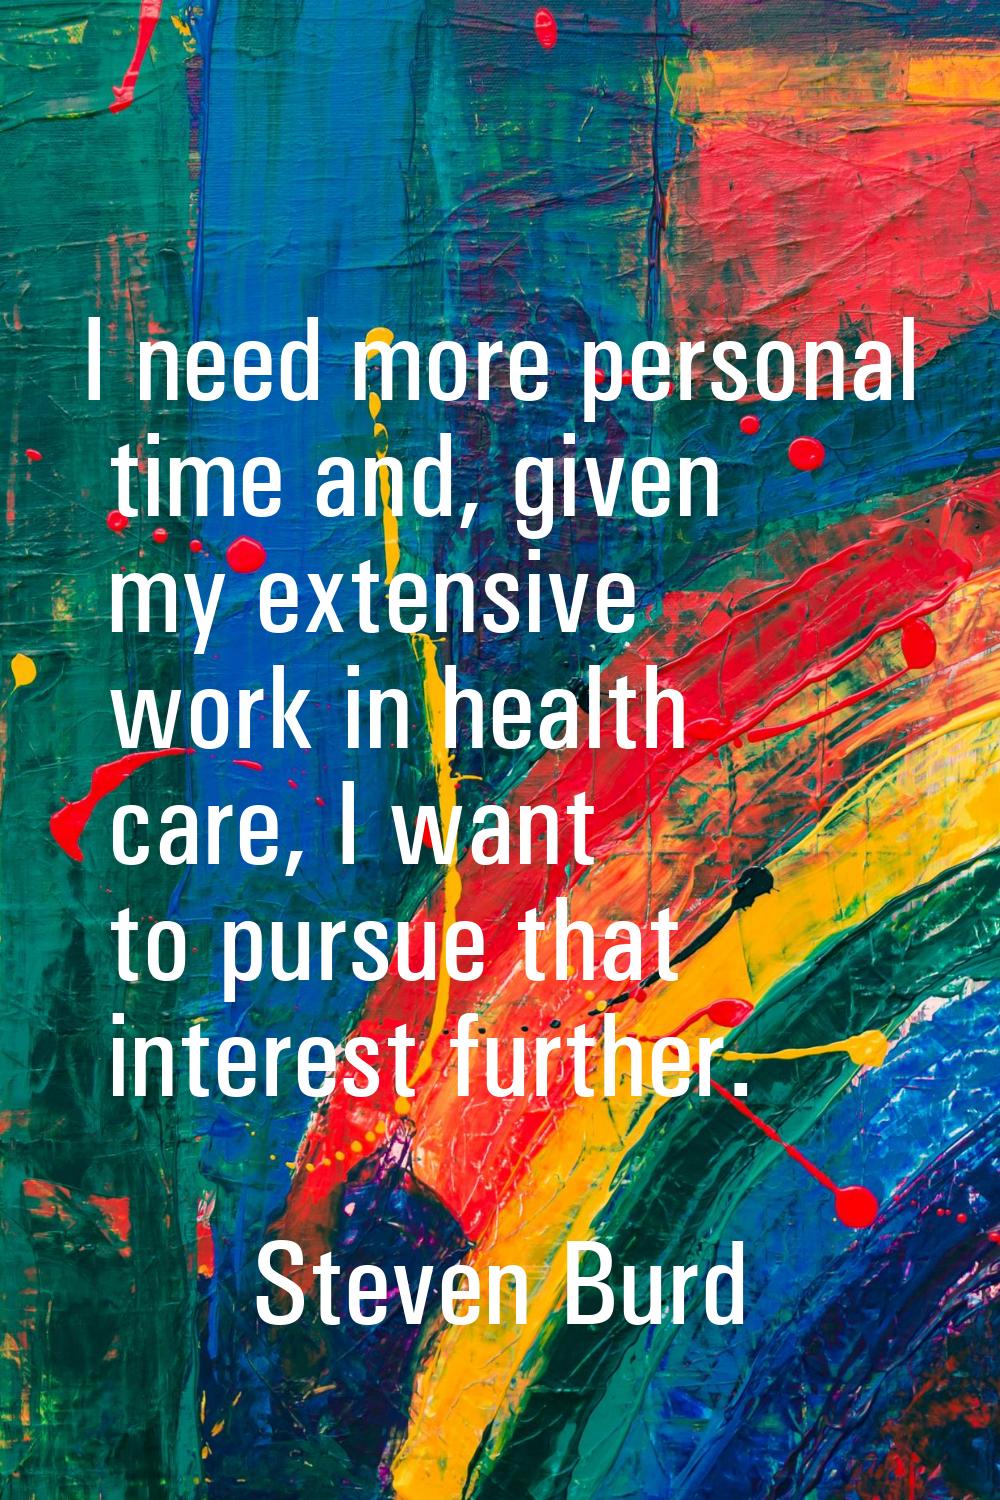 I need more personal time and, given my extensive work in health care, I want to pursue that intere